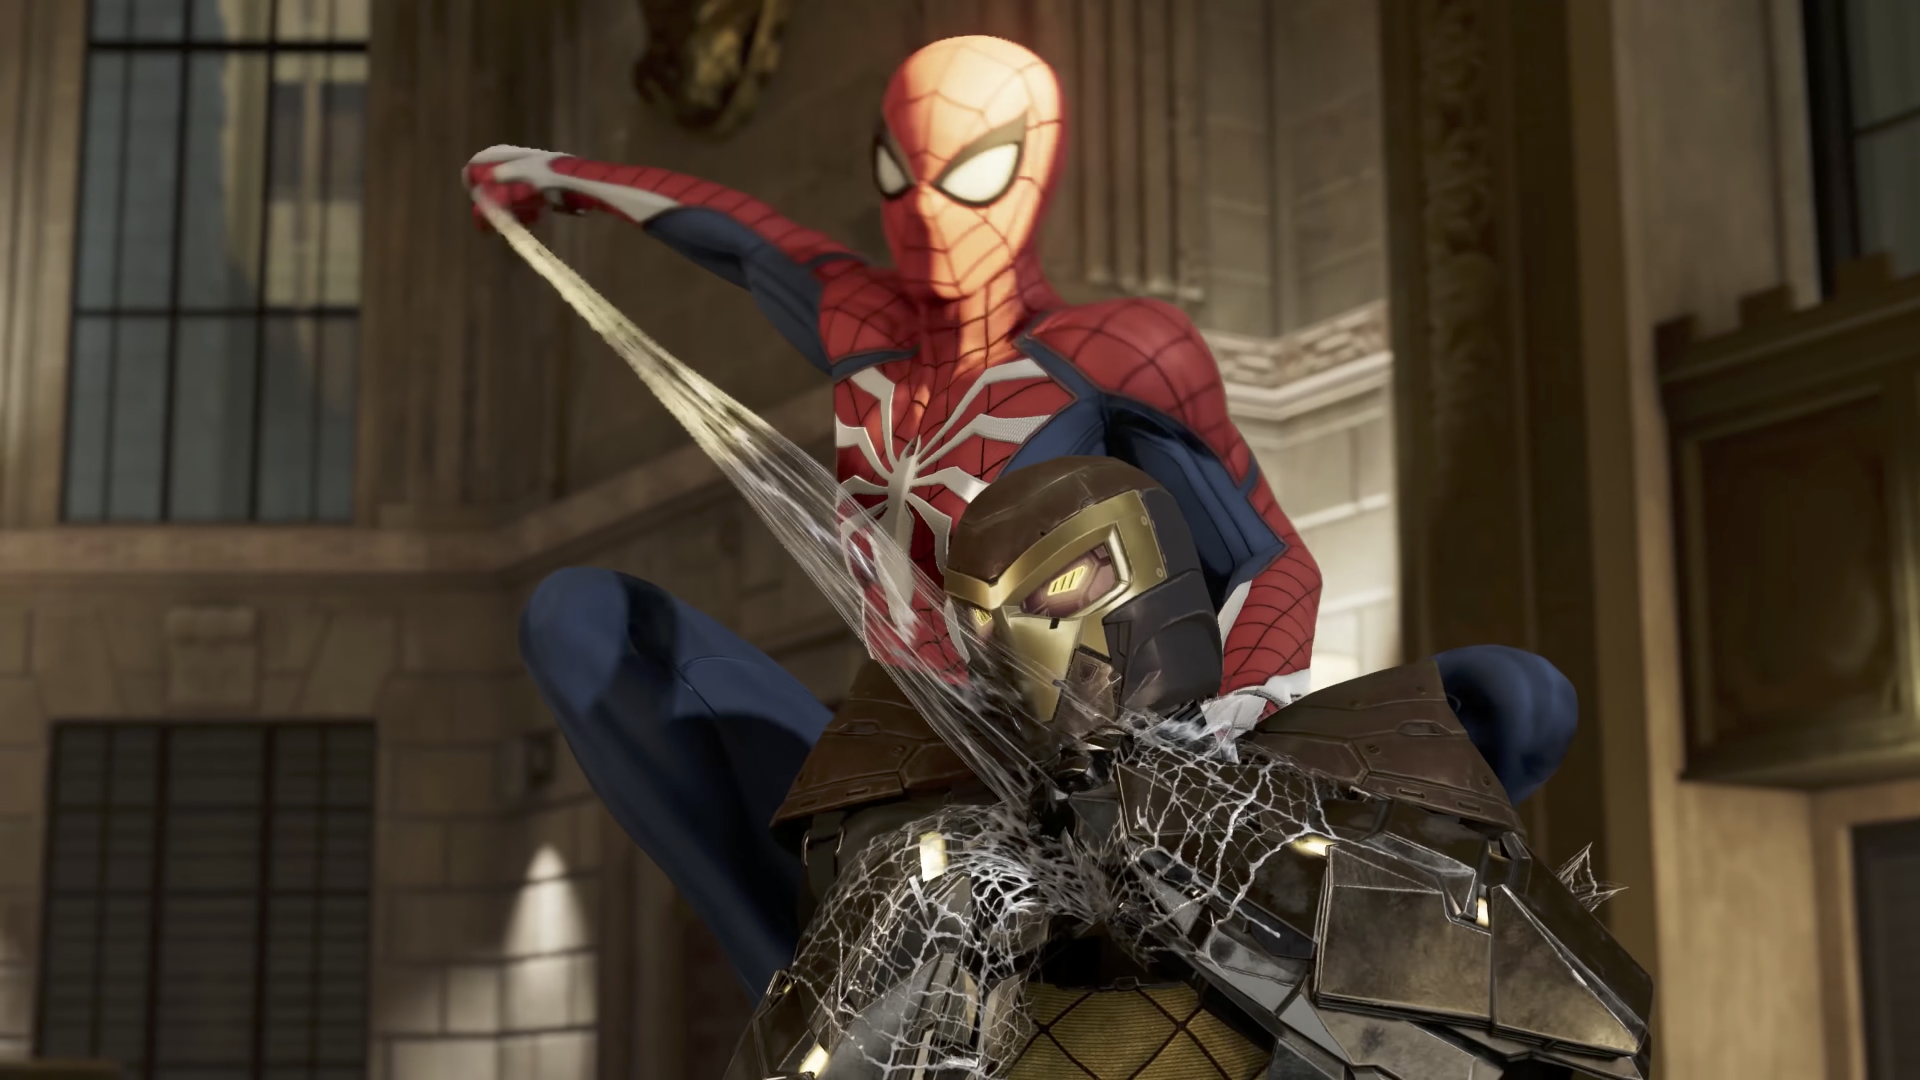 Marvel's Spider-Man review: The best Spider-Man game to date